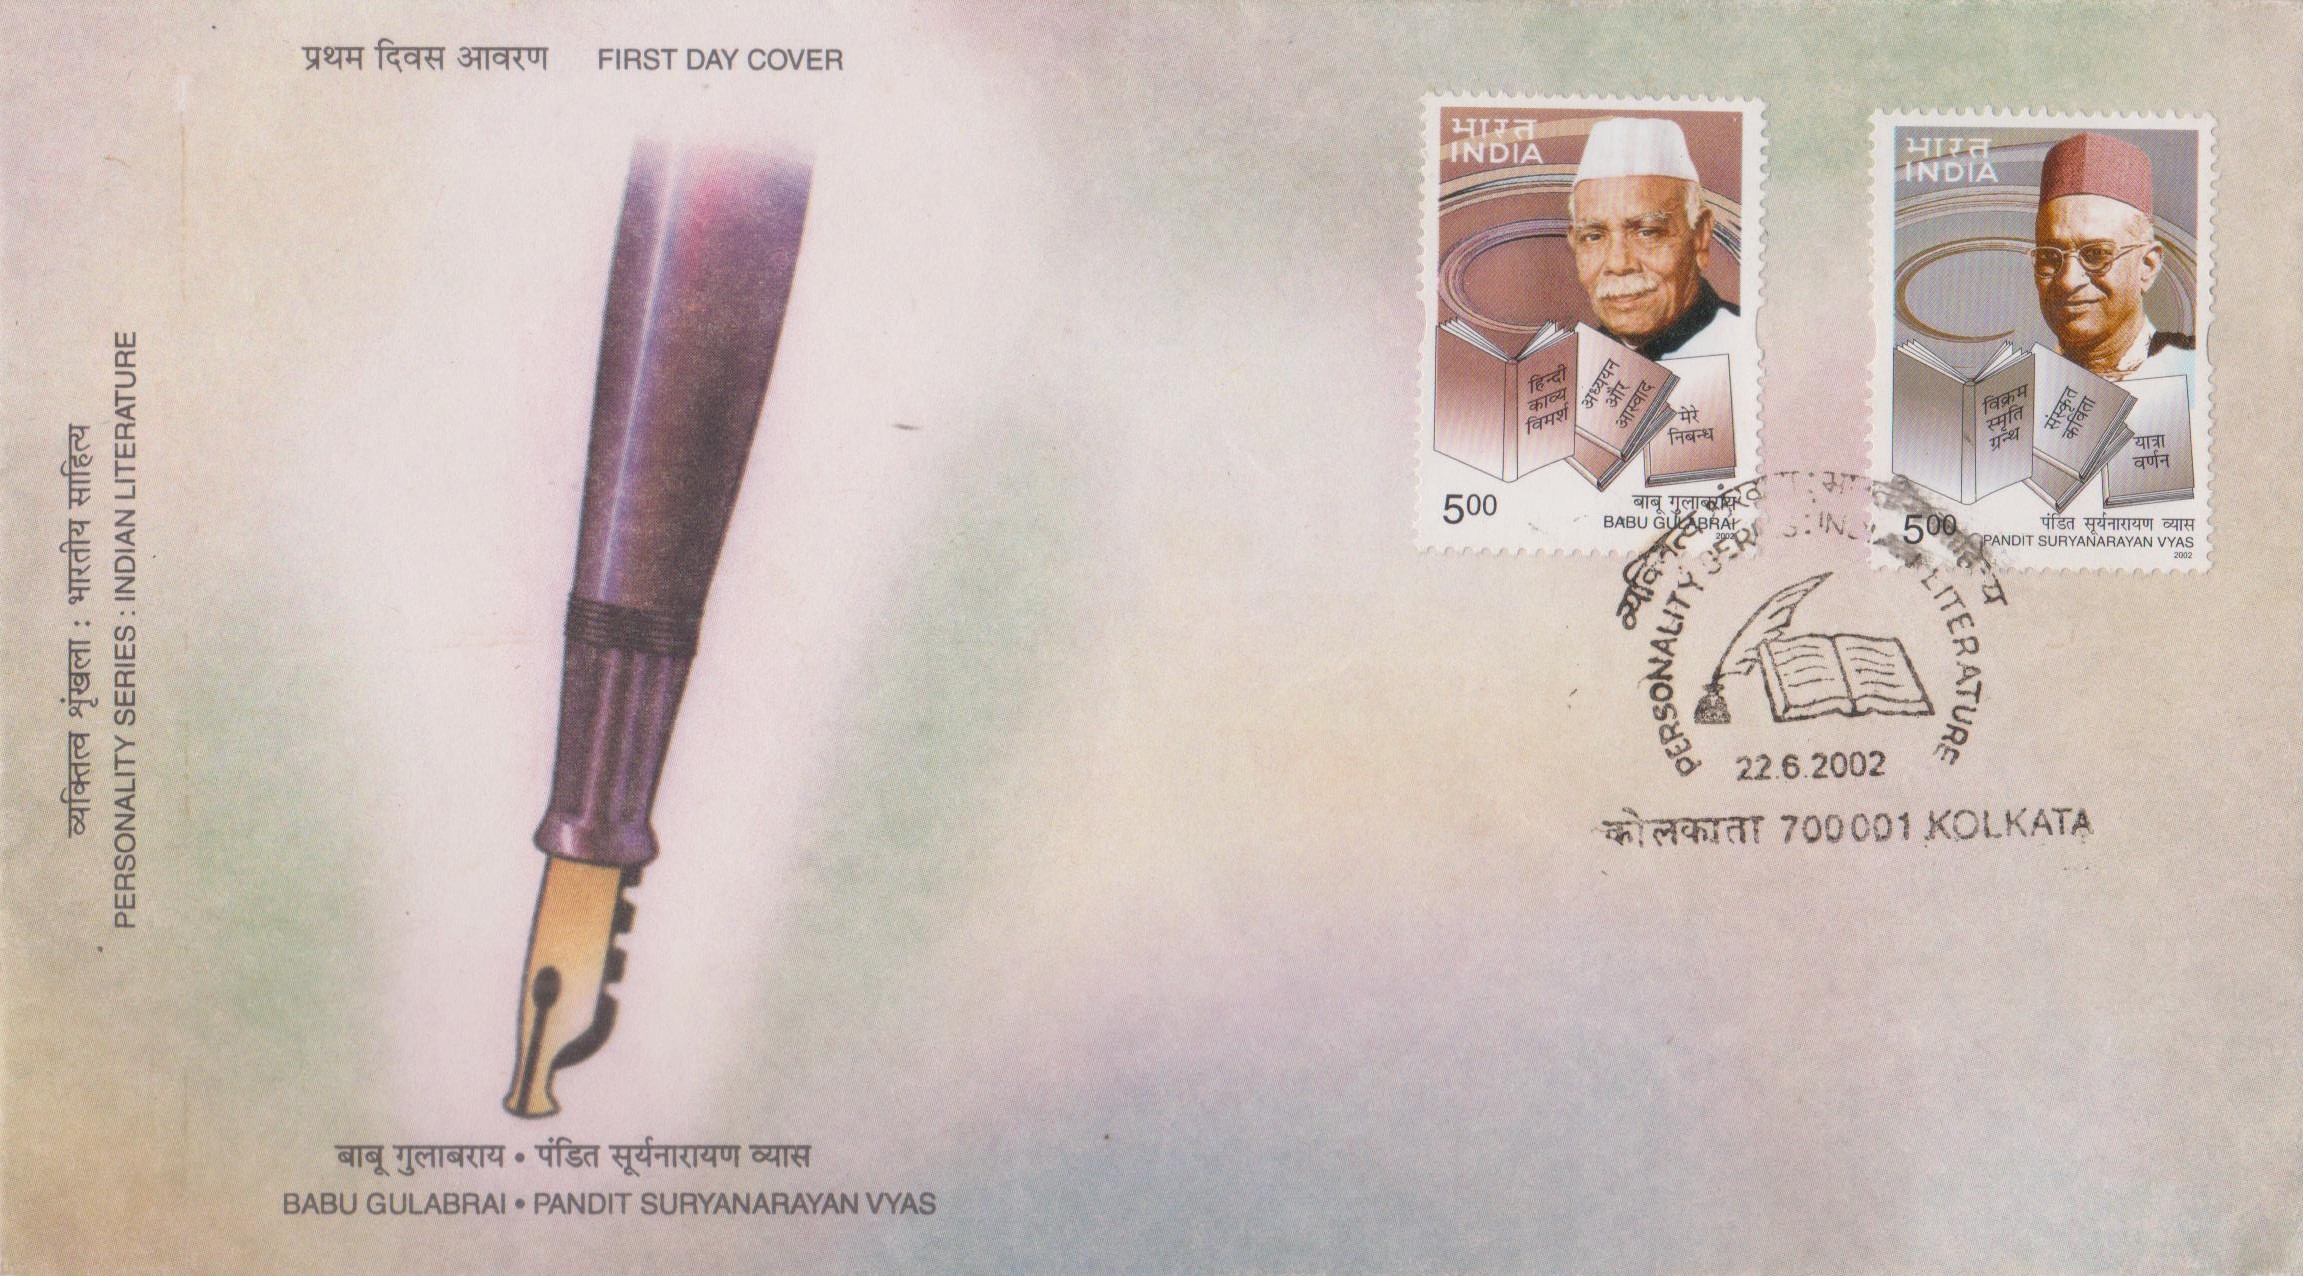 Indian Literature, First Day Cover 2002, Astrology